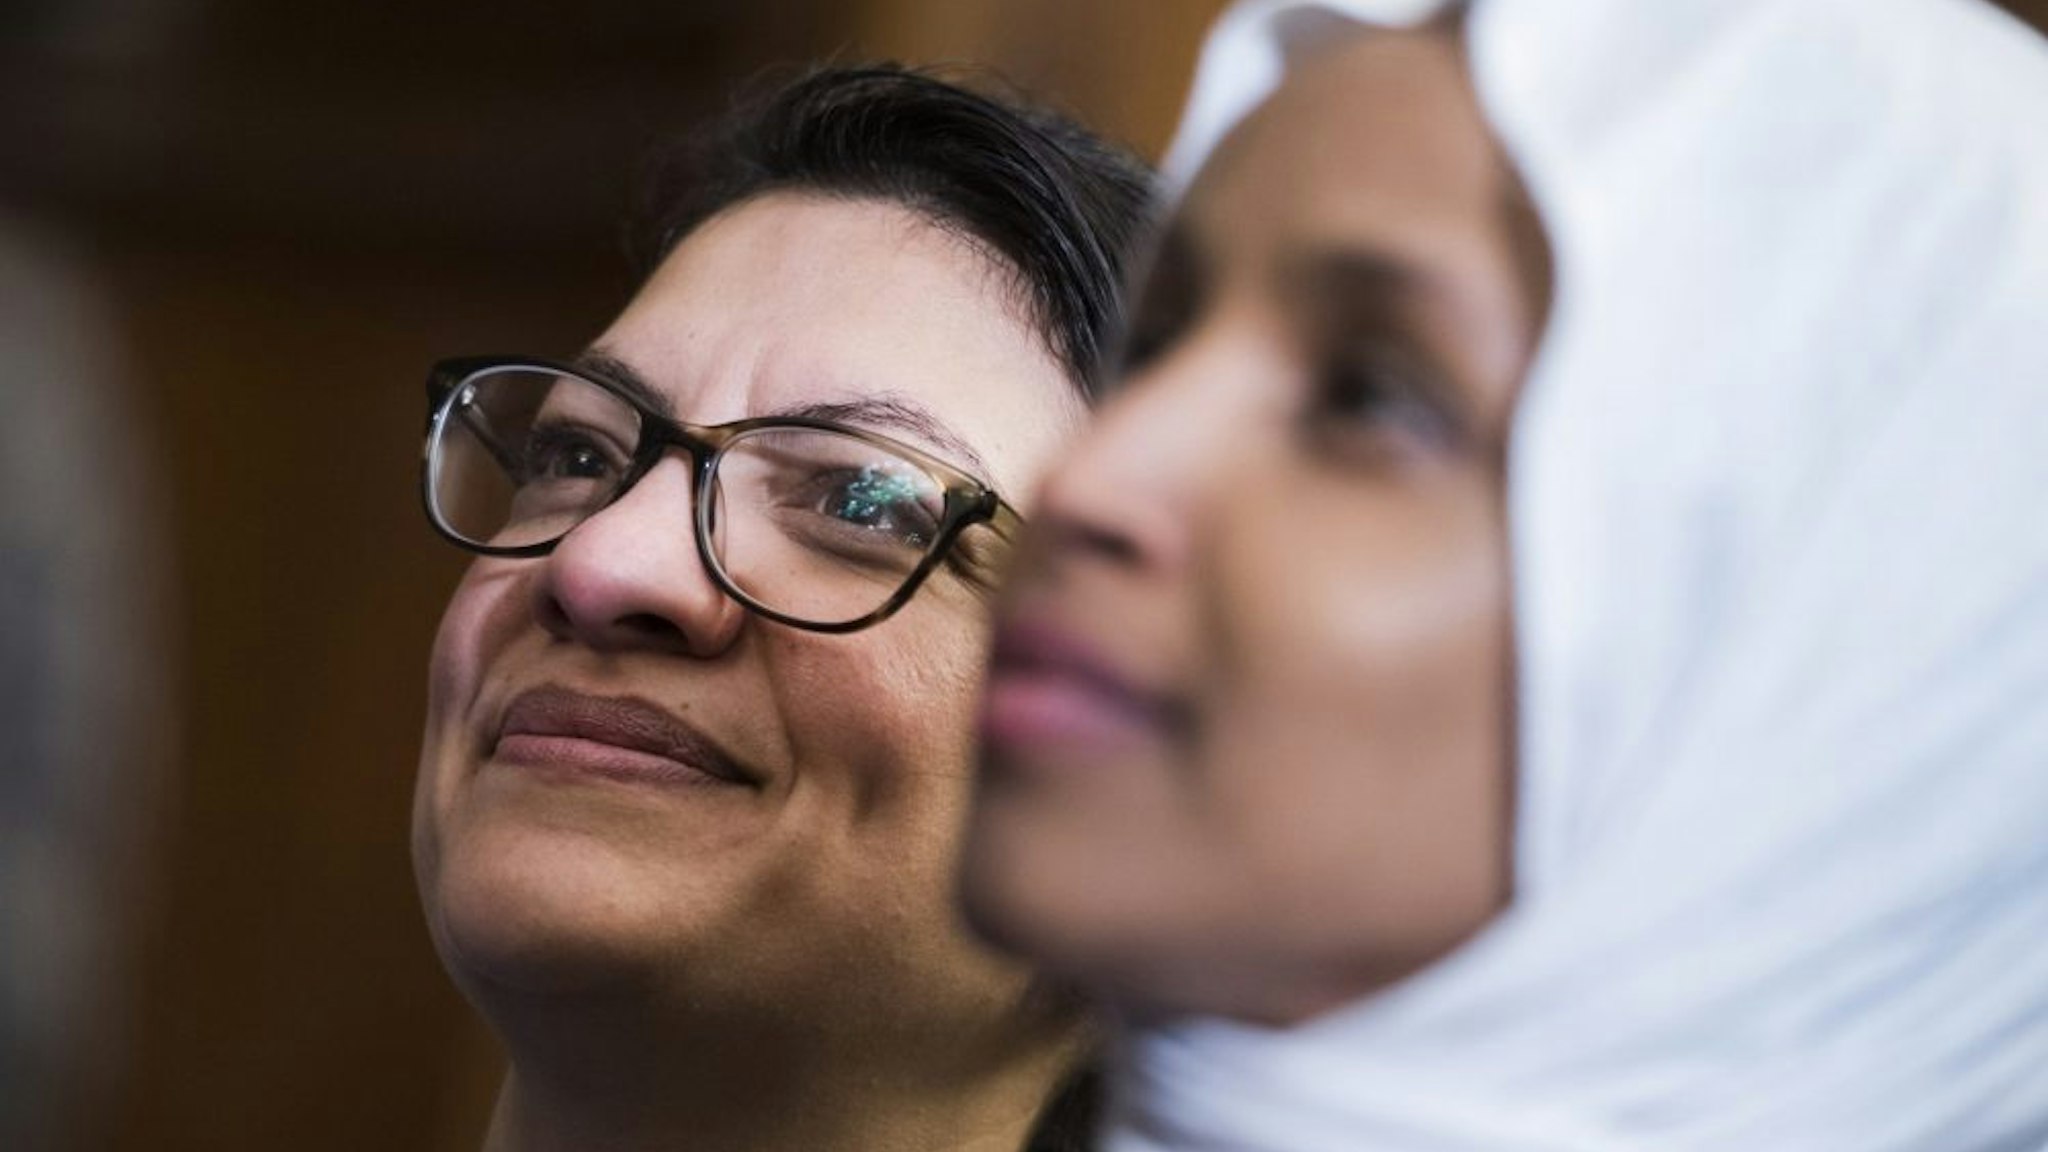 UNITED STATES - MARCH 13: Reps. Ilhan Omar, D-Minn., right, and Rashida Tlaib, D-Mich., attend a rally with Democrats in the Capitol to introduce the "Equality Act," which will amend existing civil rights legislation to bar discrimination based on gender identification and sexual orientation on Wednesday, March 13, 2019.